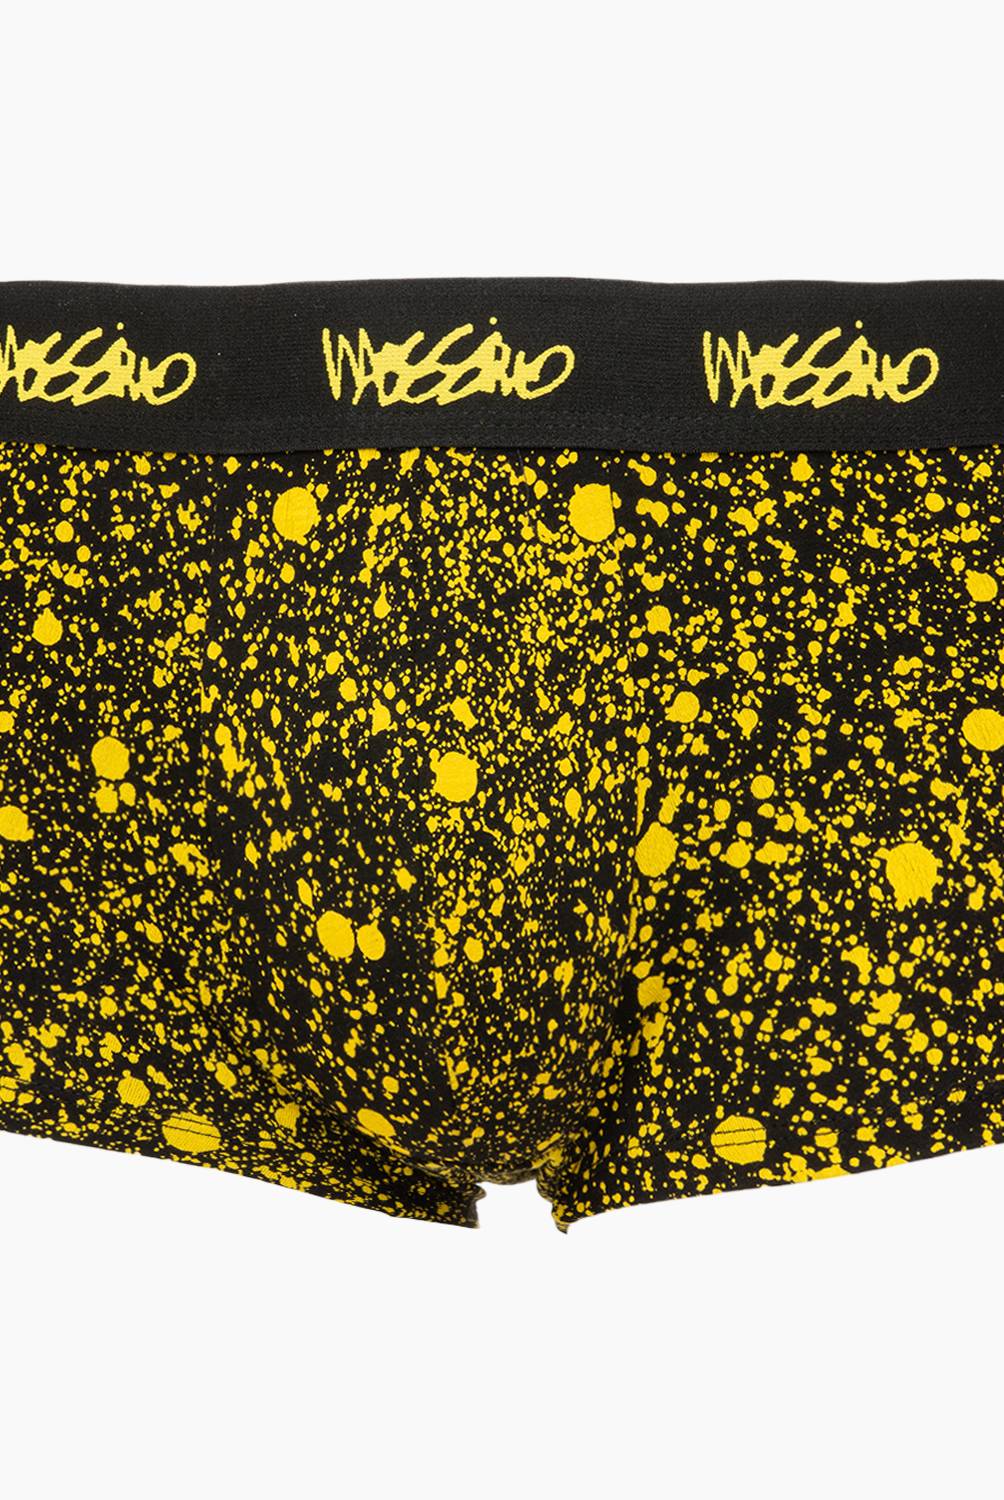 MOSSIMO - Pack Boxers